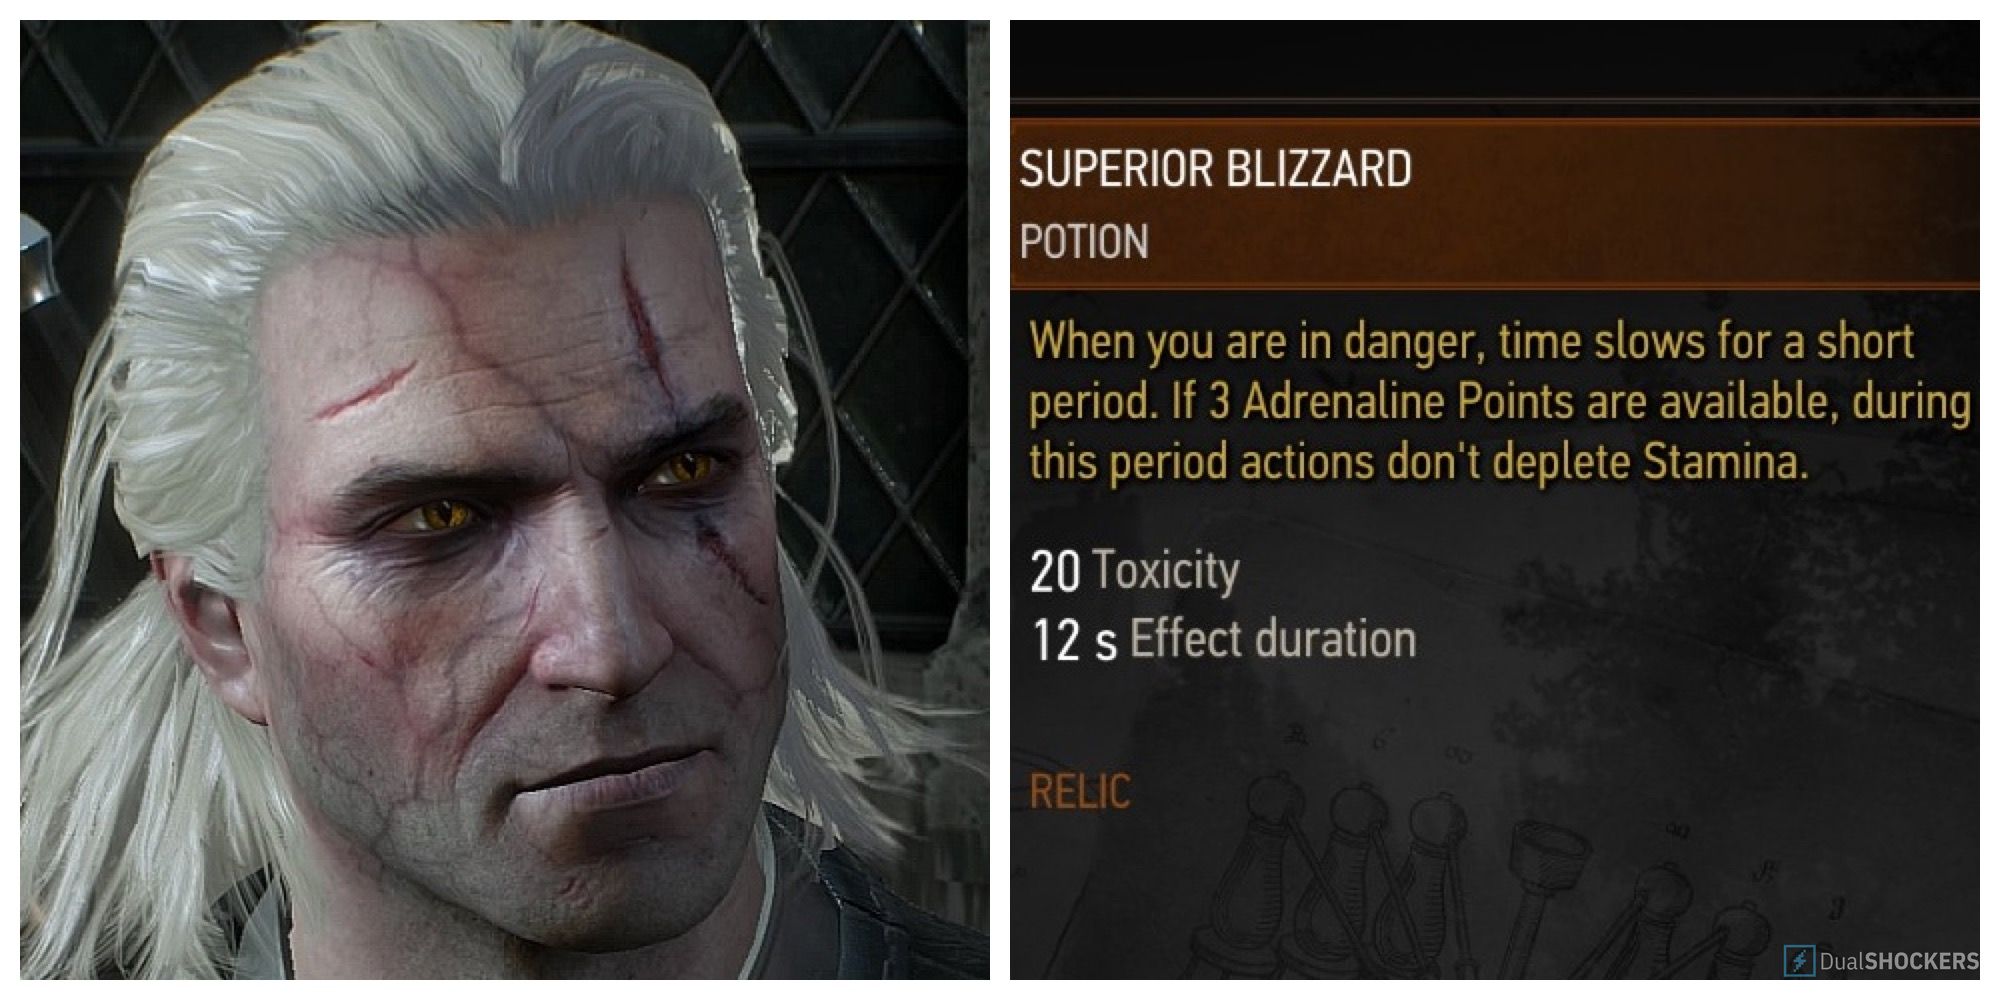 Geralt of Rivia listens to a conversation while suffering Toxicity, description of Superior Blizzard